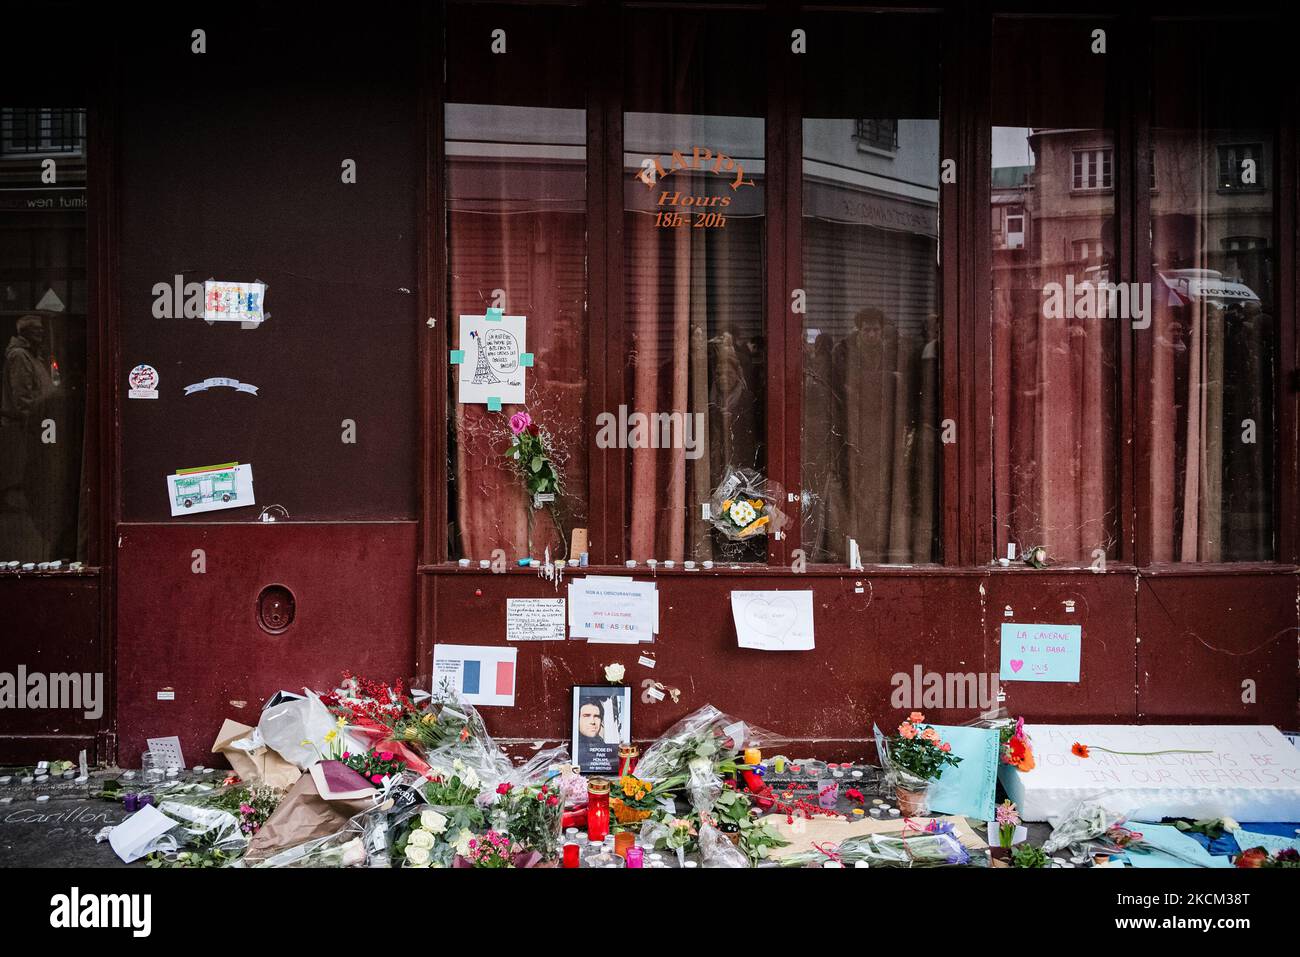 On November 16, 2015, three days after the attacks of November 13, 2015 that killed 130 people and injured more than 400 in a series of attacks that hit several places in Paris including the Stade de France, cafe terraces and the Bataclan concert hall the emotion is at its peak in the streets of Paris, as here in front of the terrace of the restaurant 'Le carillon' where passersby gather and lay flowers, candles and messages in tribute to the victims in front of one of the places of the attacks still marked by the impact of bullets. (Photo by Samuel Boivin/NurPhoto) Stock Photo